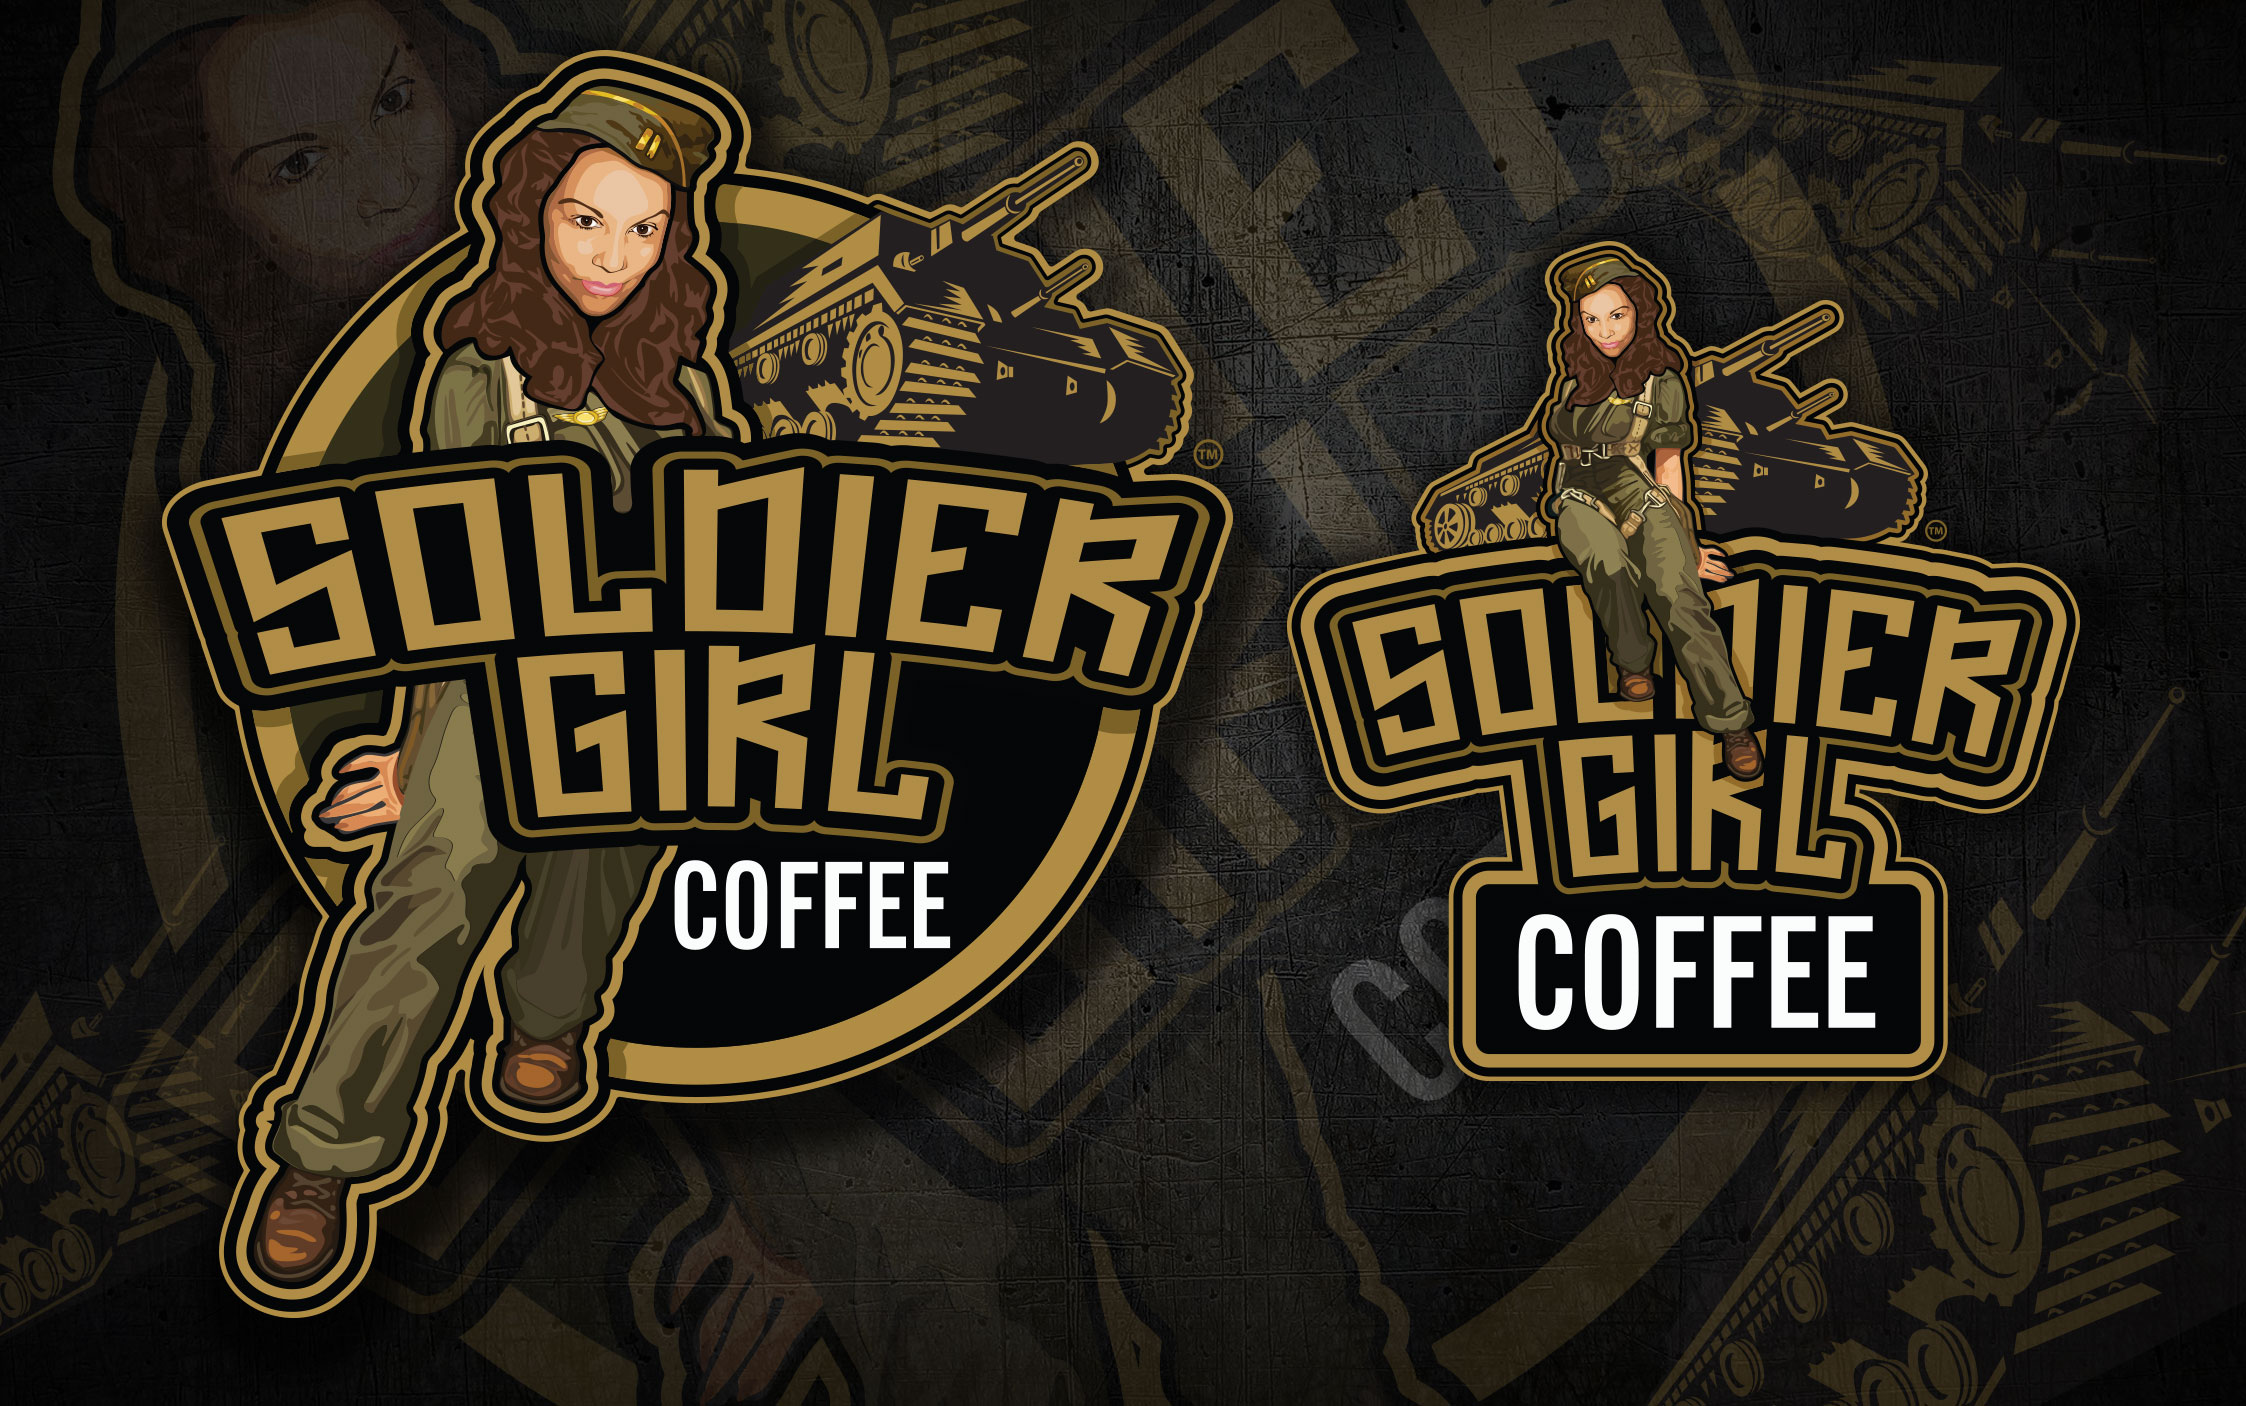 Soldier Girl Coffee